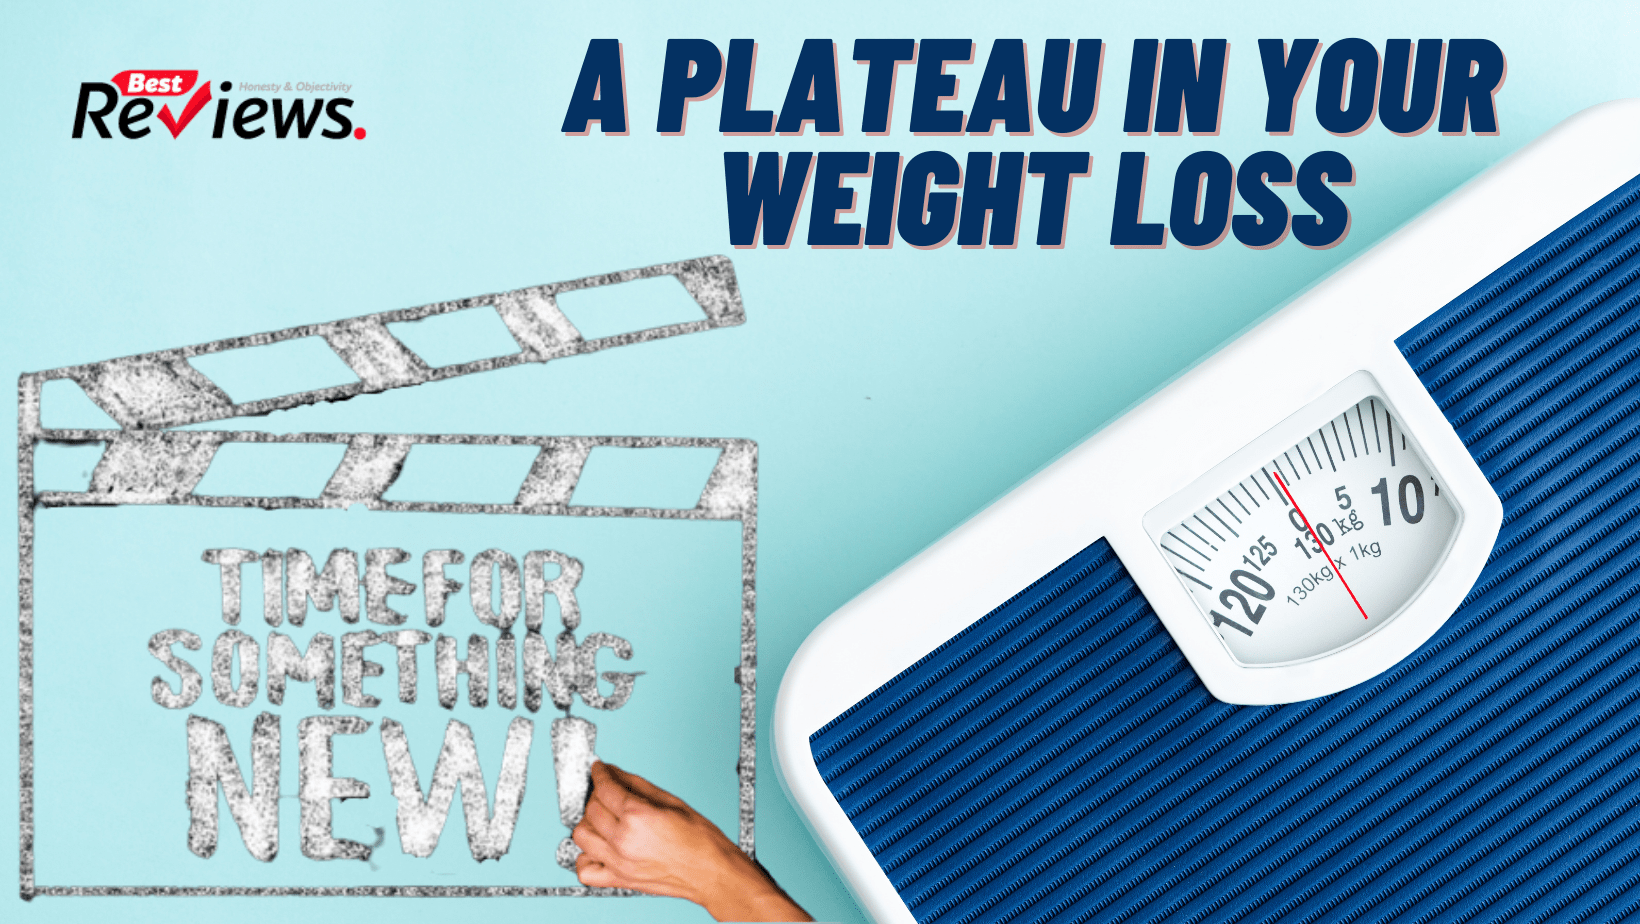 6 Tips can help you lose weight and feel great, If you've reached a plateau in your weight loss